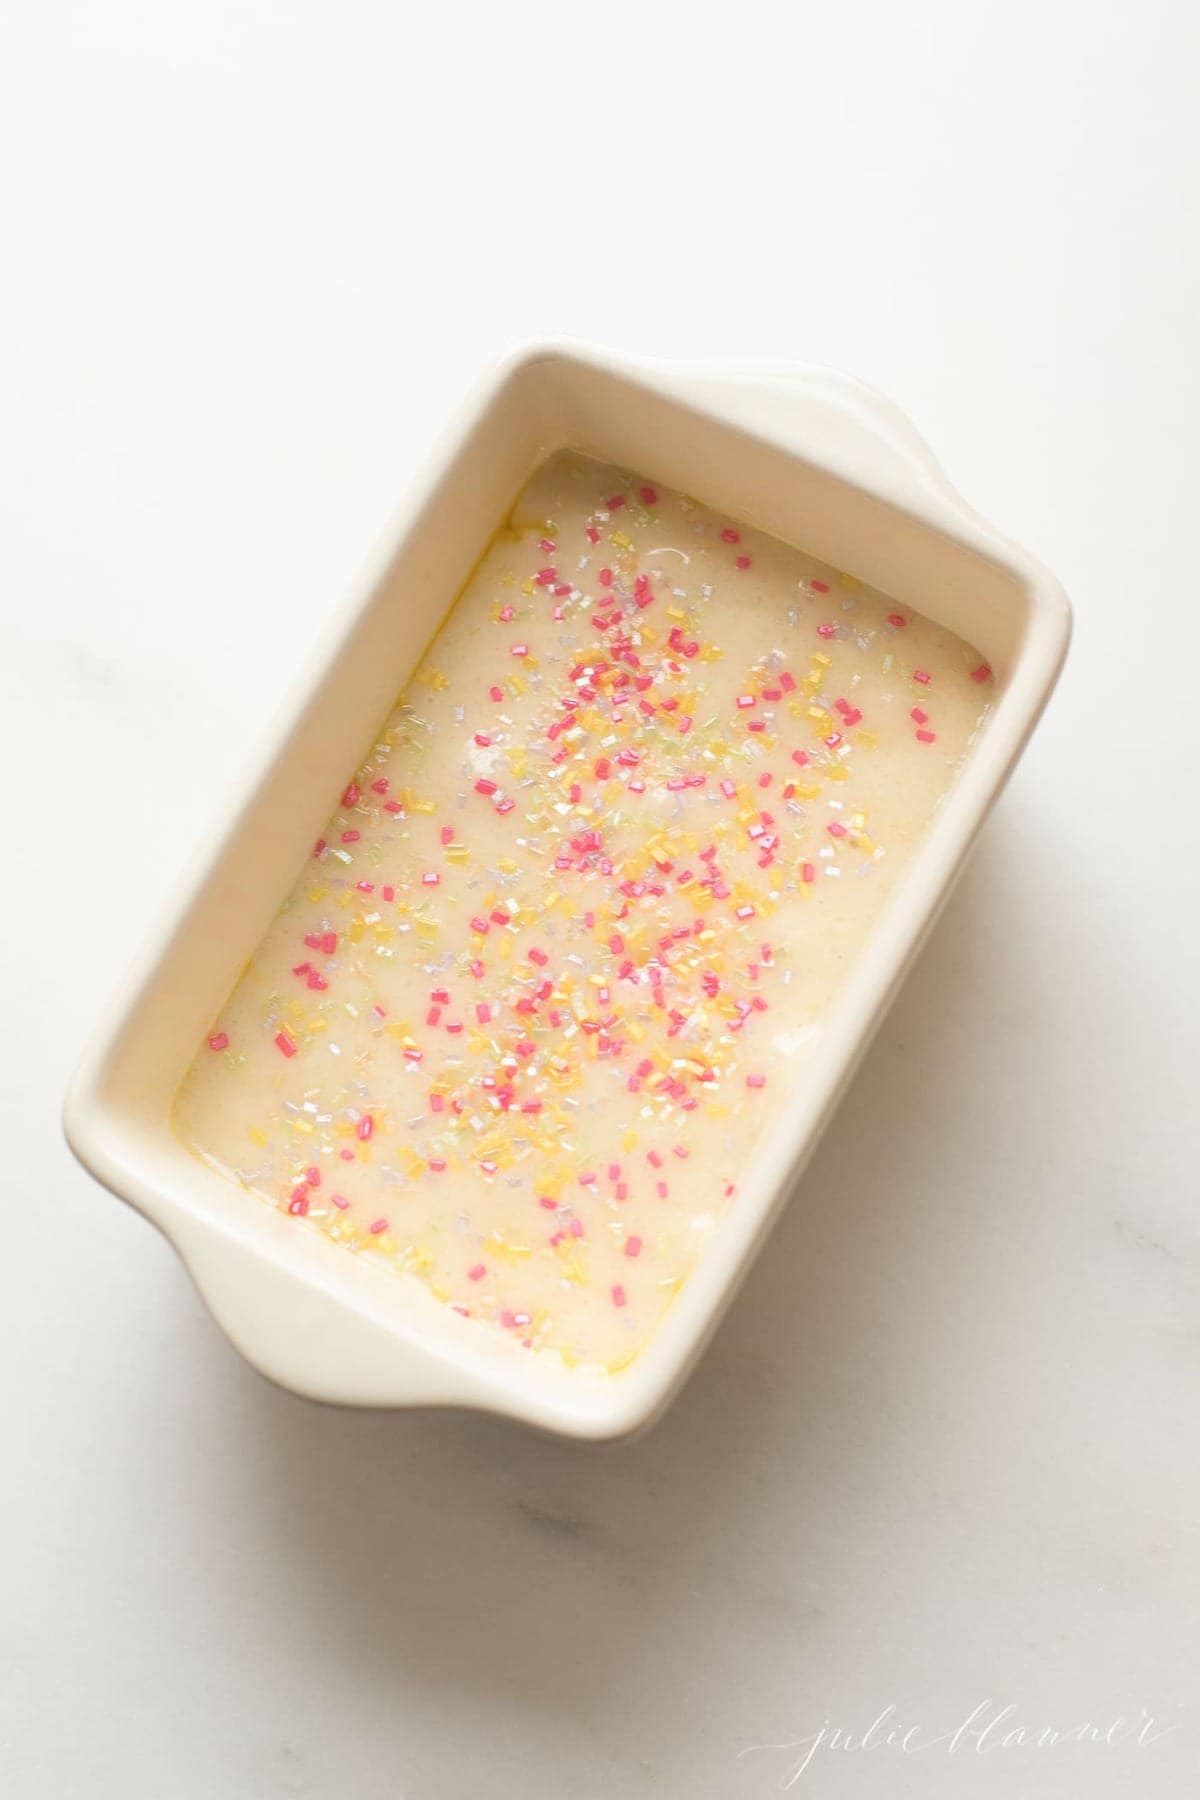 funfetti bread recipe unbaked in a small white loaf pan